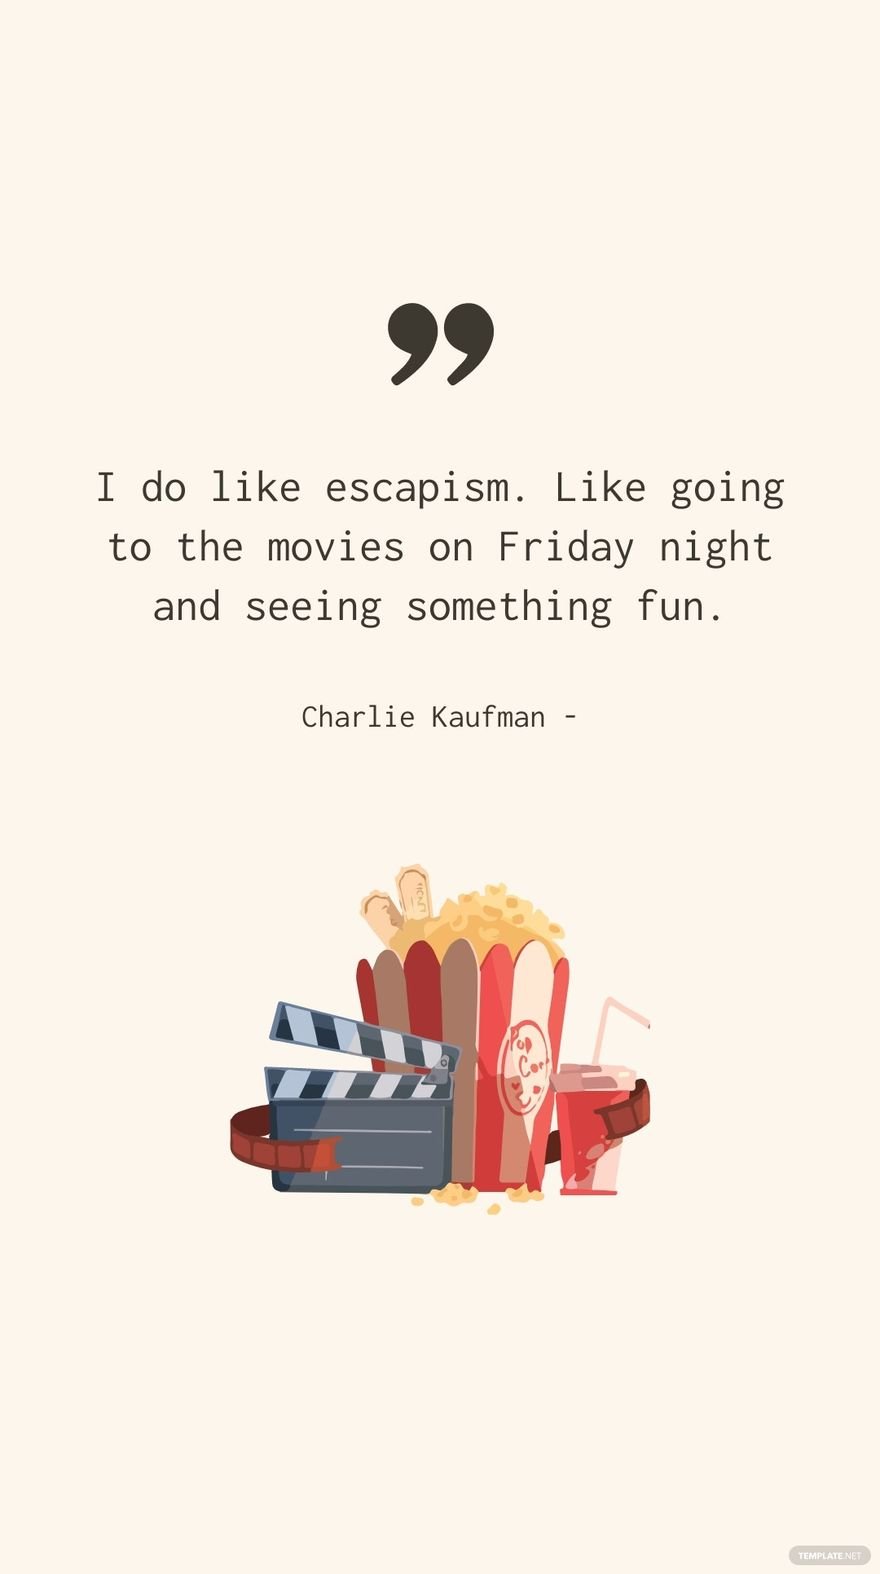 Charlie Kaufman - I do like escapism. Like going to the movies on Friday night and seeing something fun.